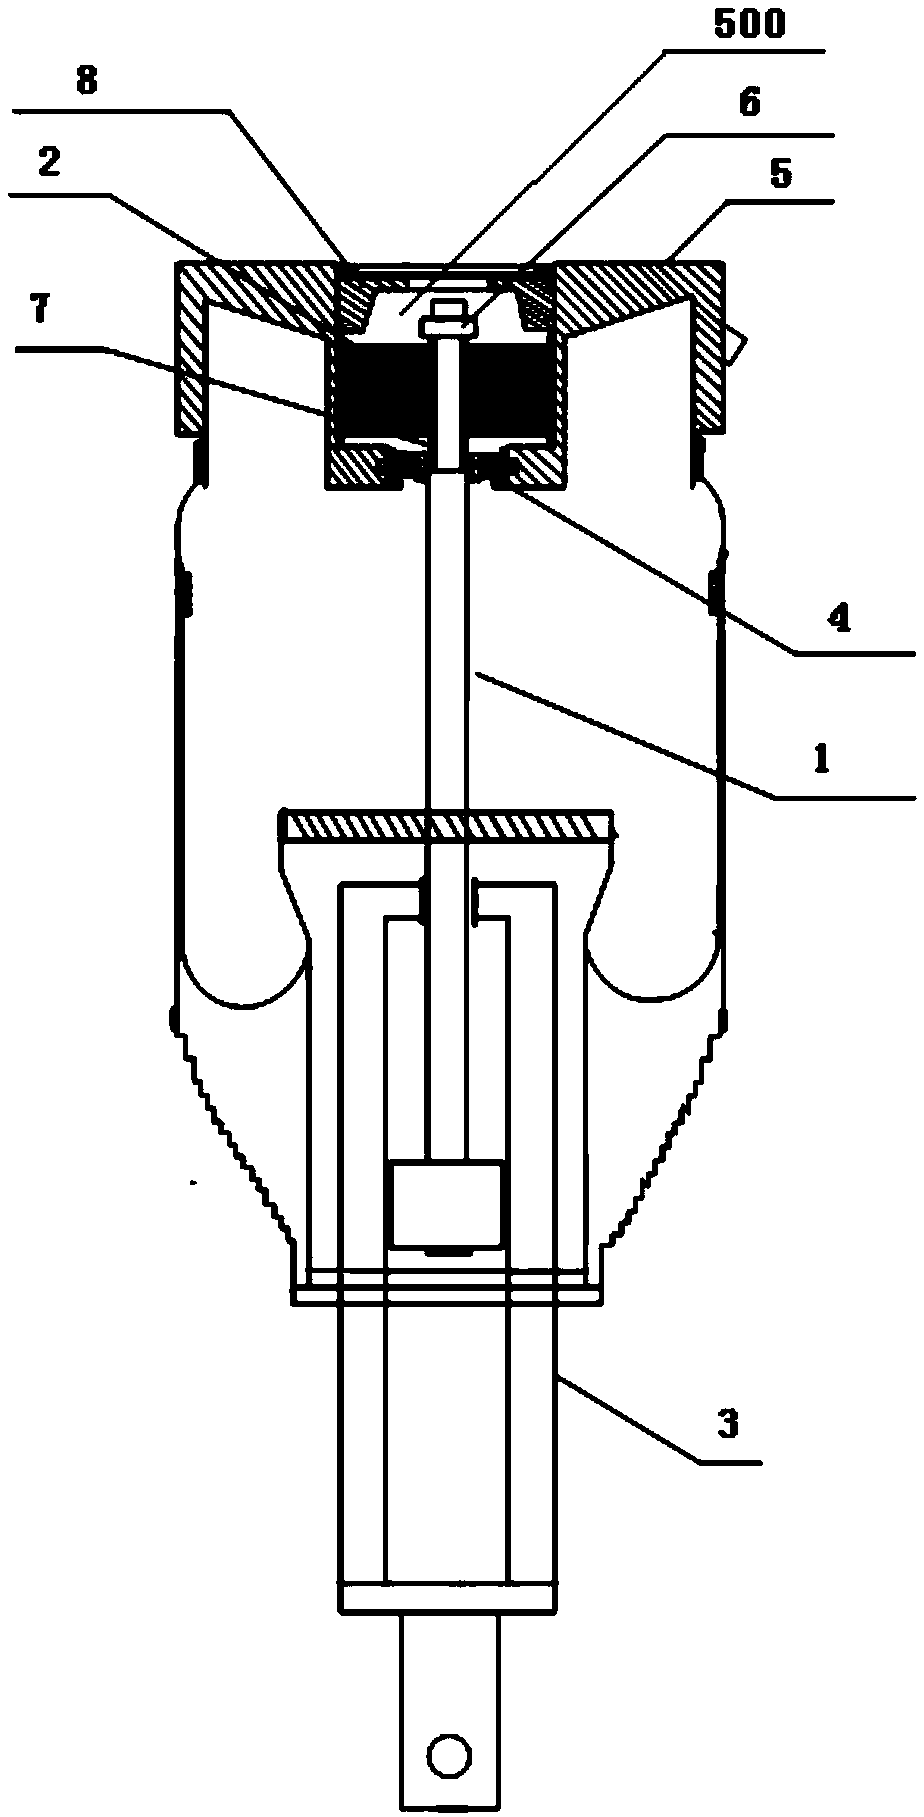 Lever-mechanism-based air spring shock absorber assembly providing lateral force